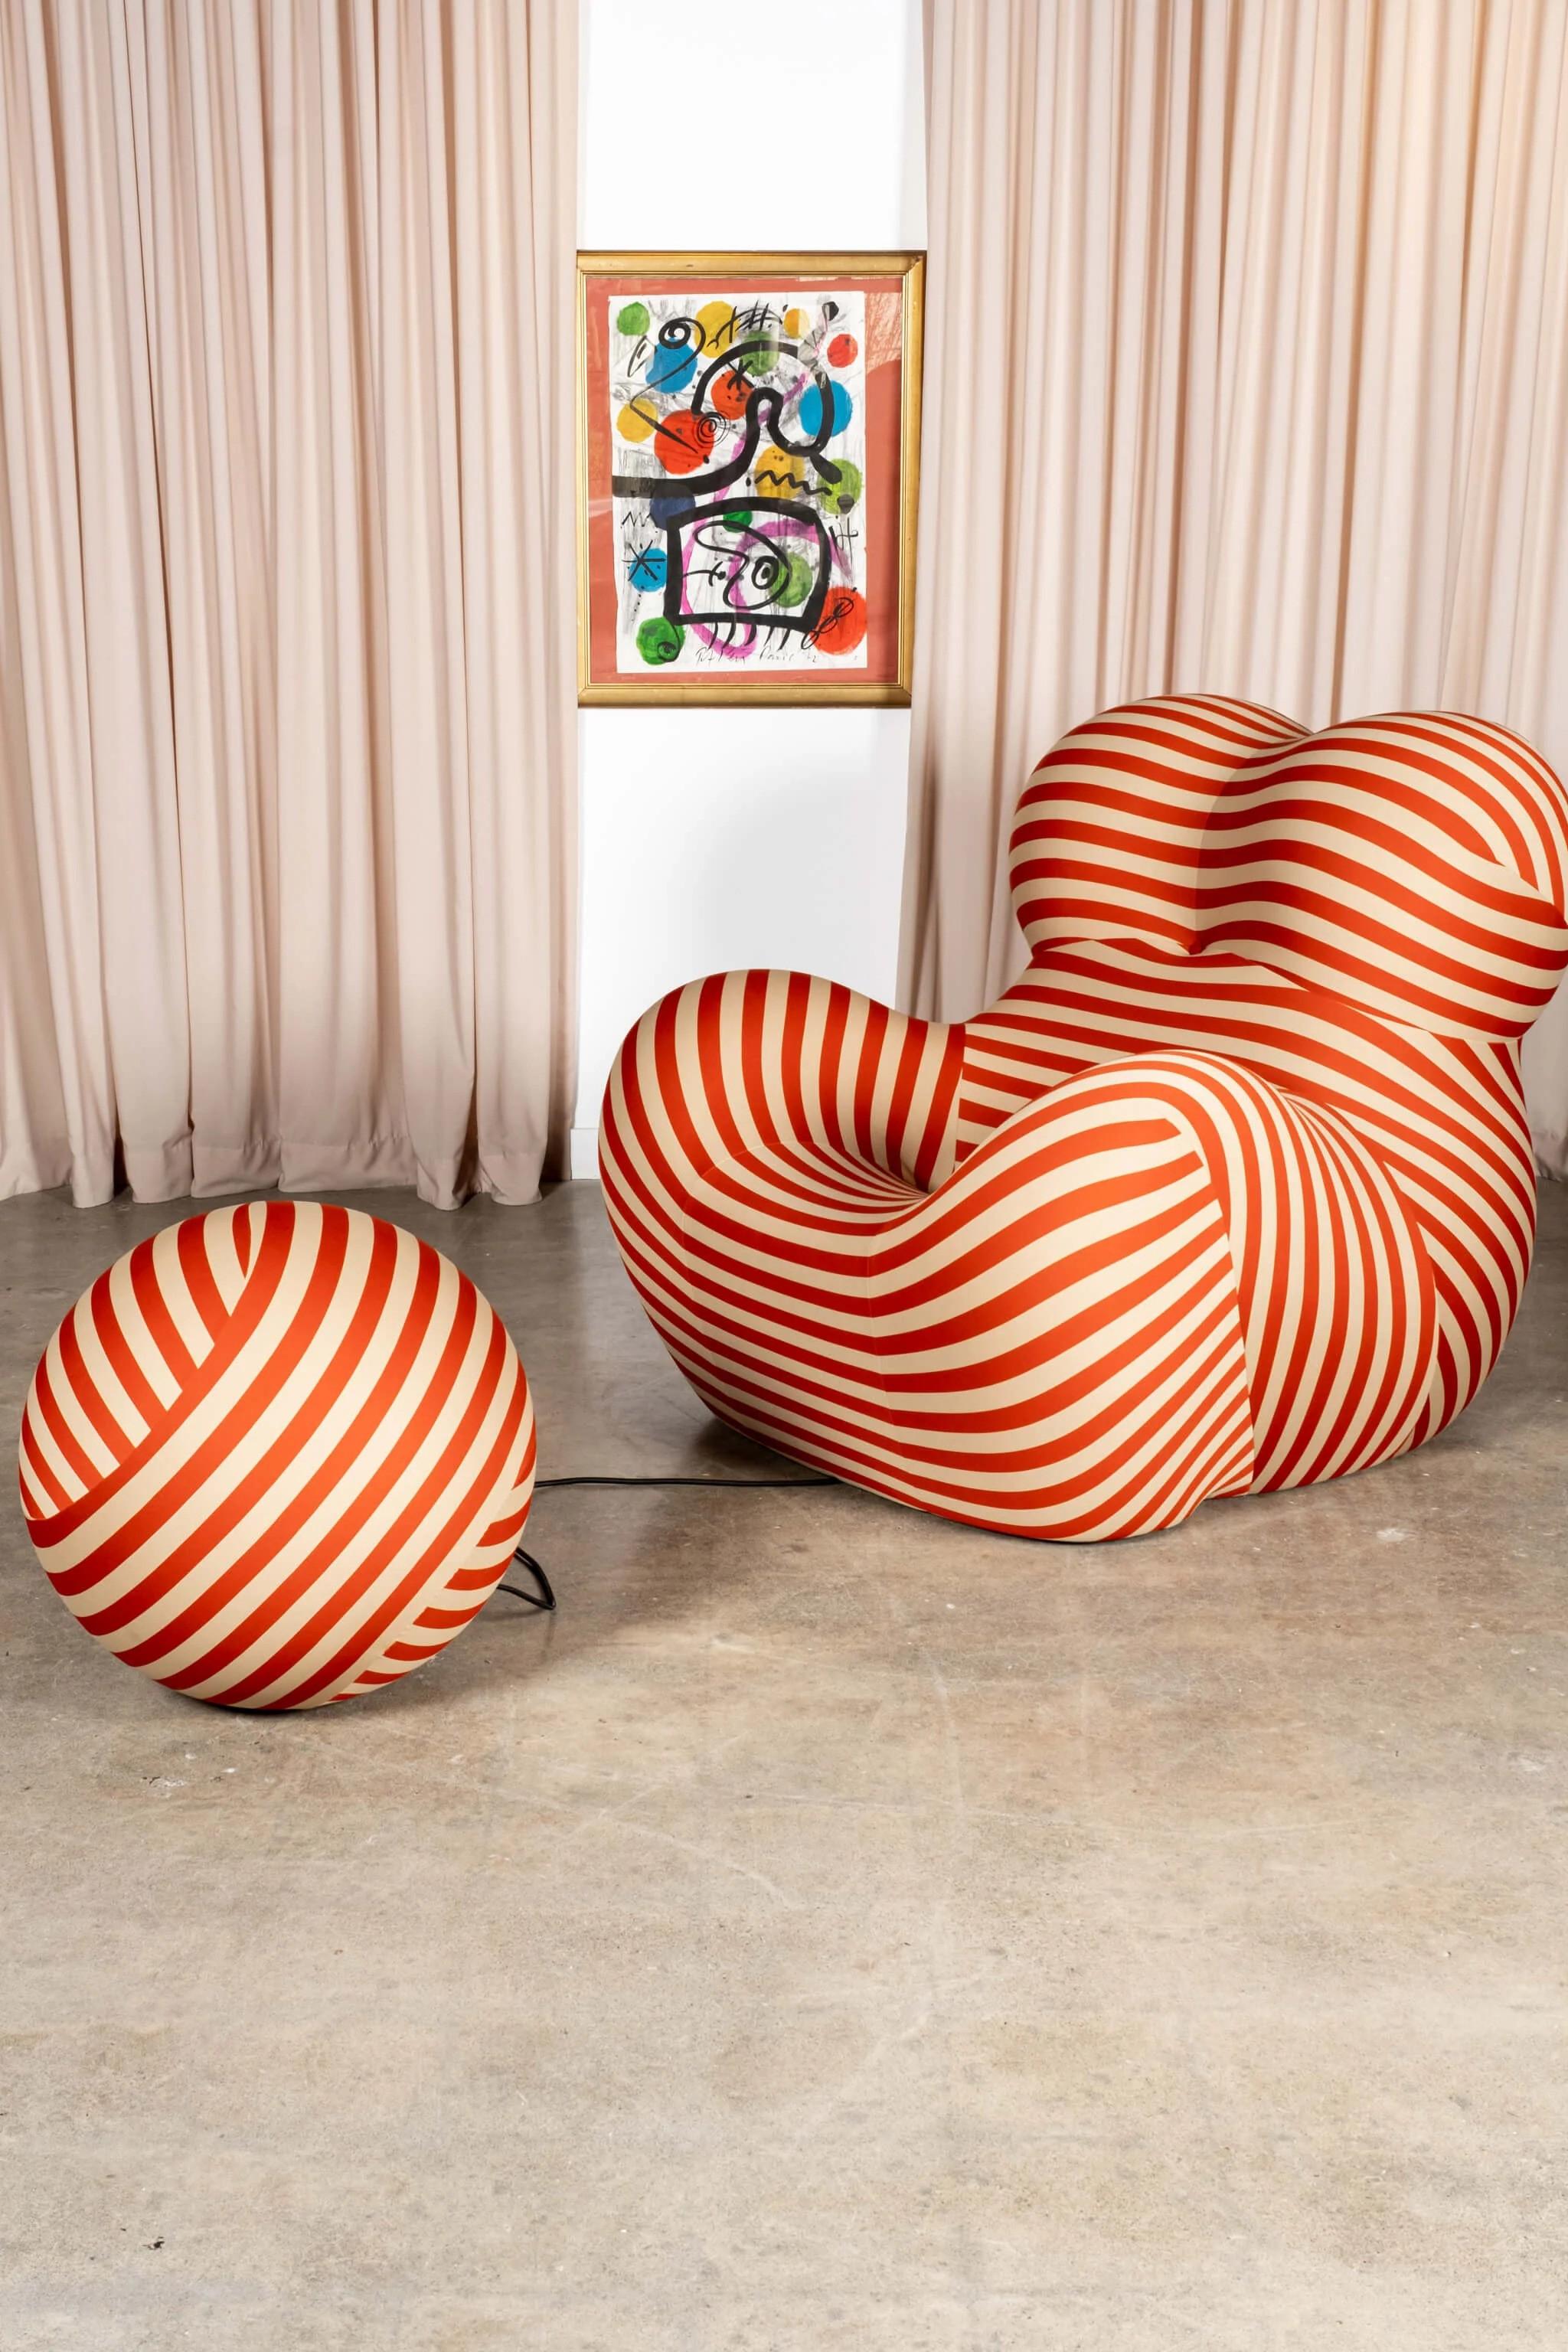 Since its first appearance, the Up Series, designed in 1969 by Gaetano Pesce, has been one of the most talked about examples of modern furniture design. The exceptional visual impact of six models of ball-like seats in various sizes, entirely made